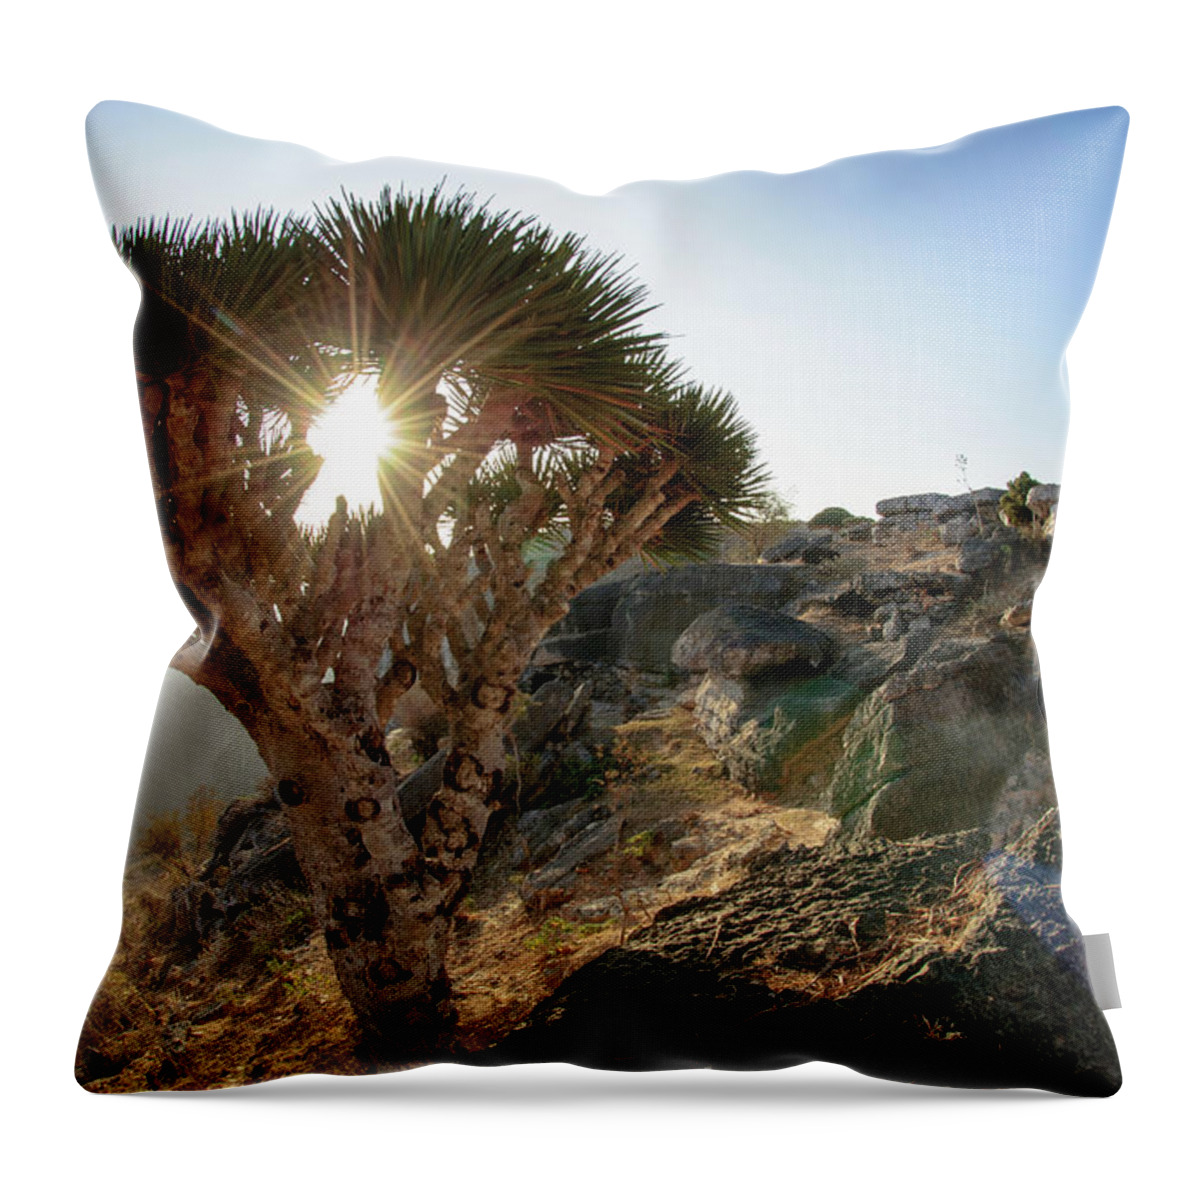 Tranquility Throw Pillow featuring the photograph Dragonbloodtree by Mario Eder